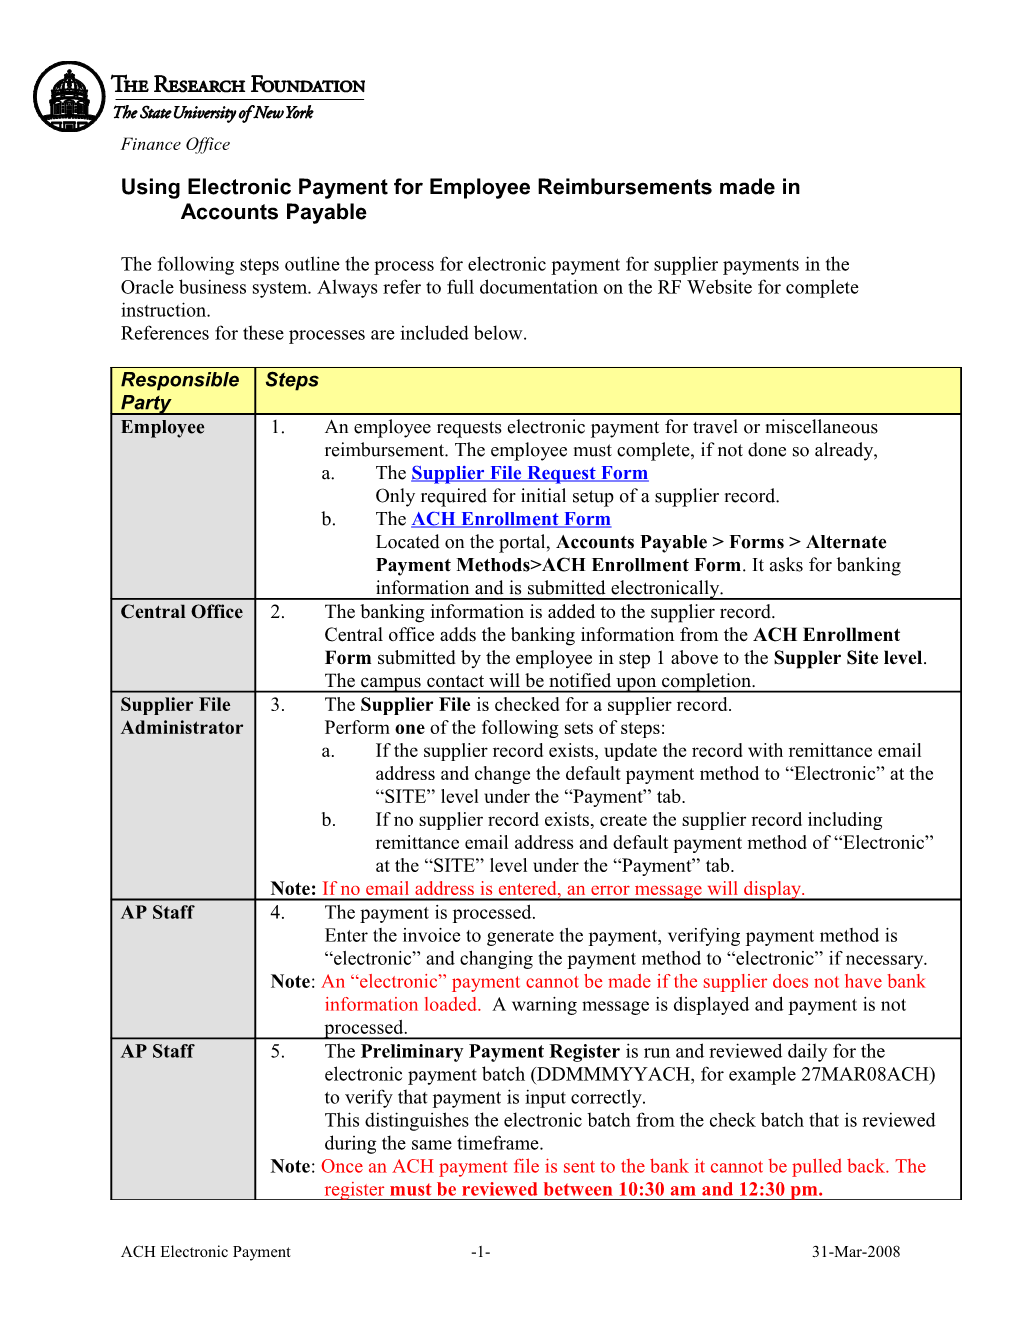 Using Electronic Payment for Employee Reimbursements Made in Accounts Payable